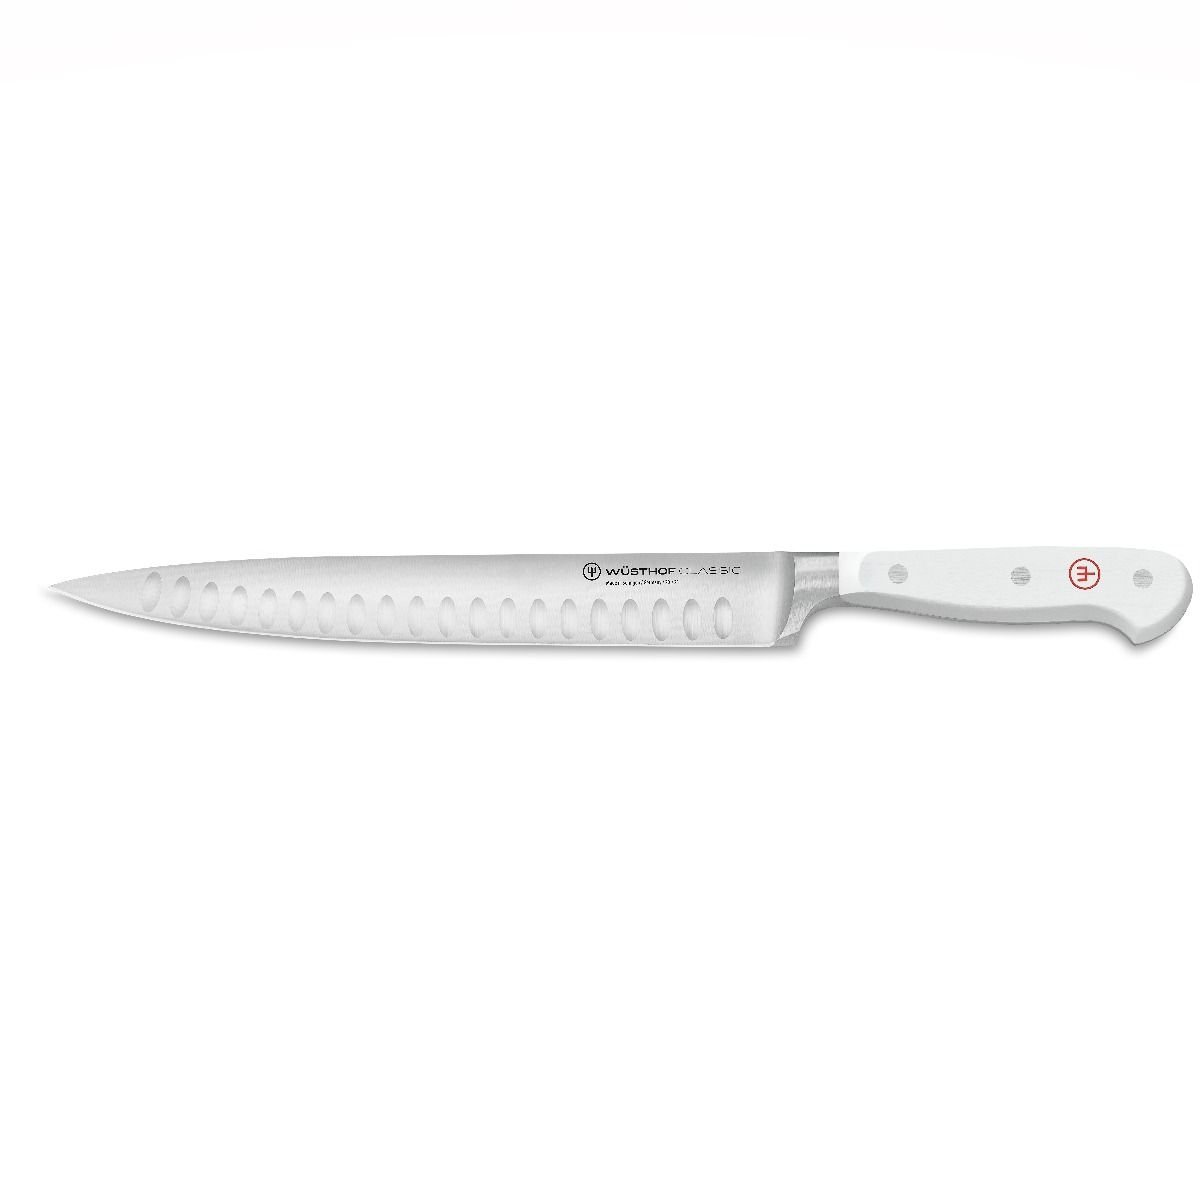 Wüsthof Classic 9 Hollow-Edge Carving Knife